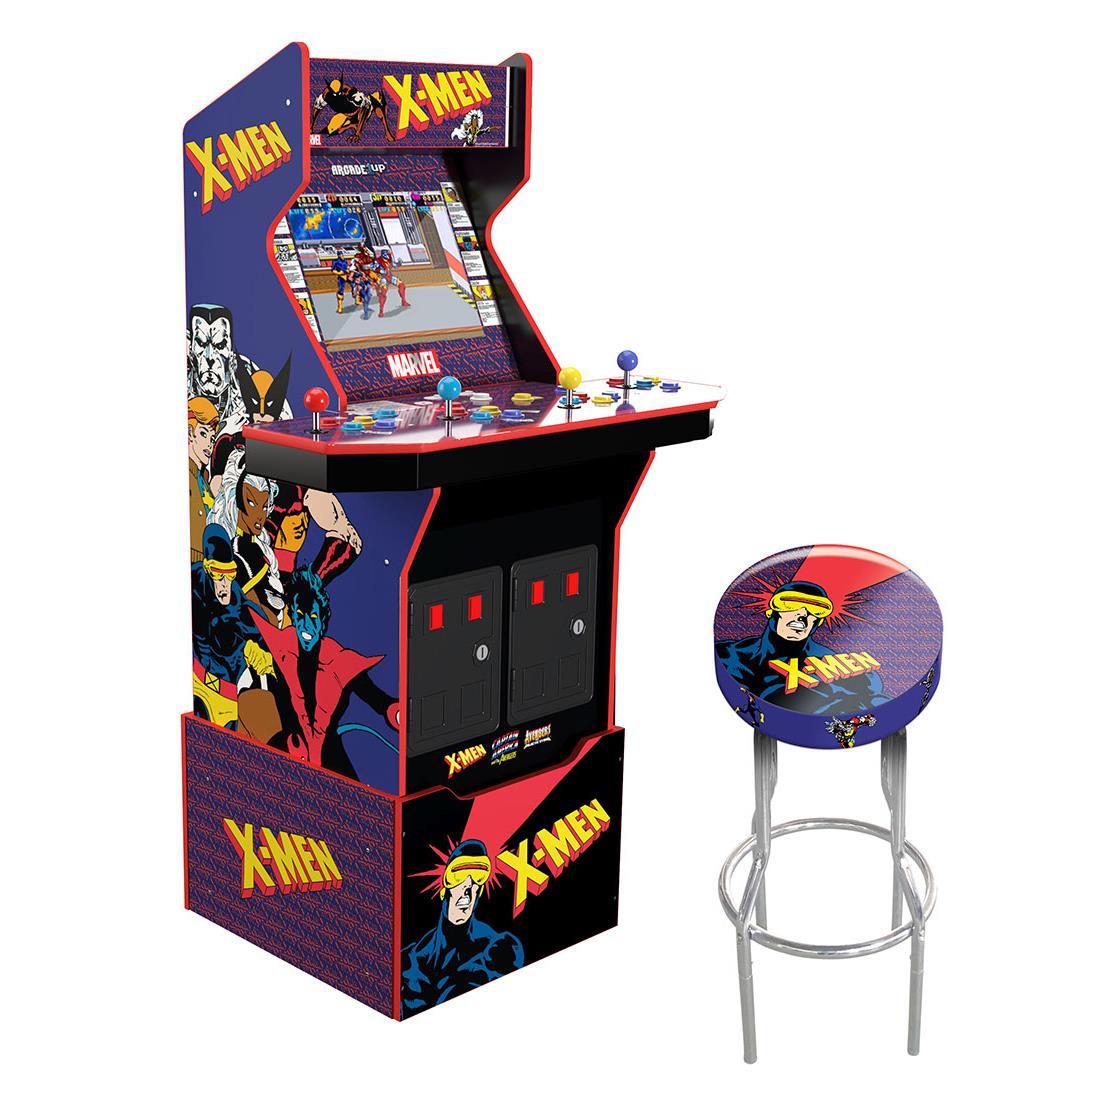 arcade1up x-men edition arcade cabinet with exclusive licensed stool